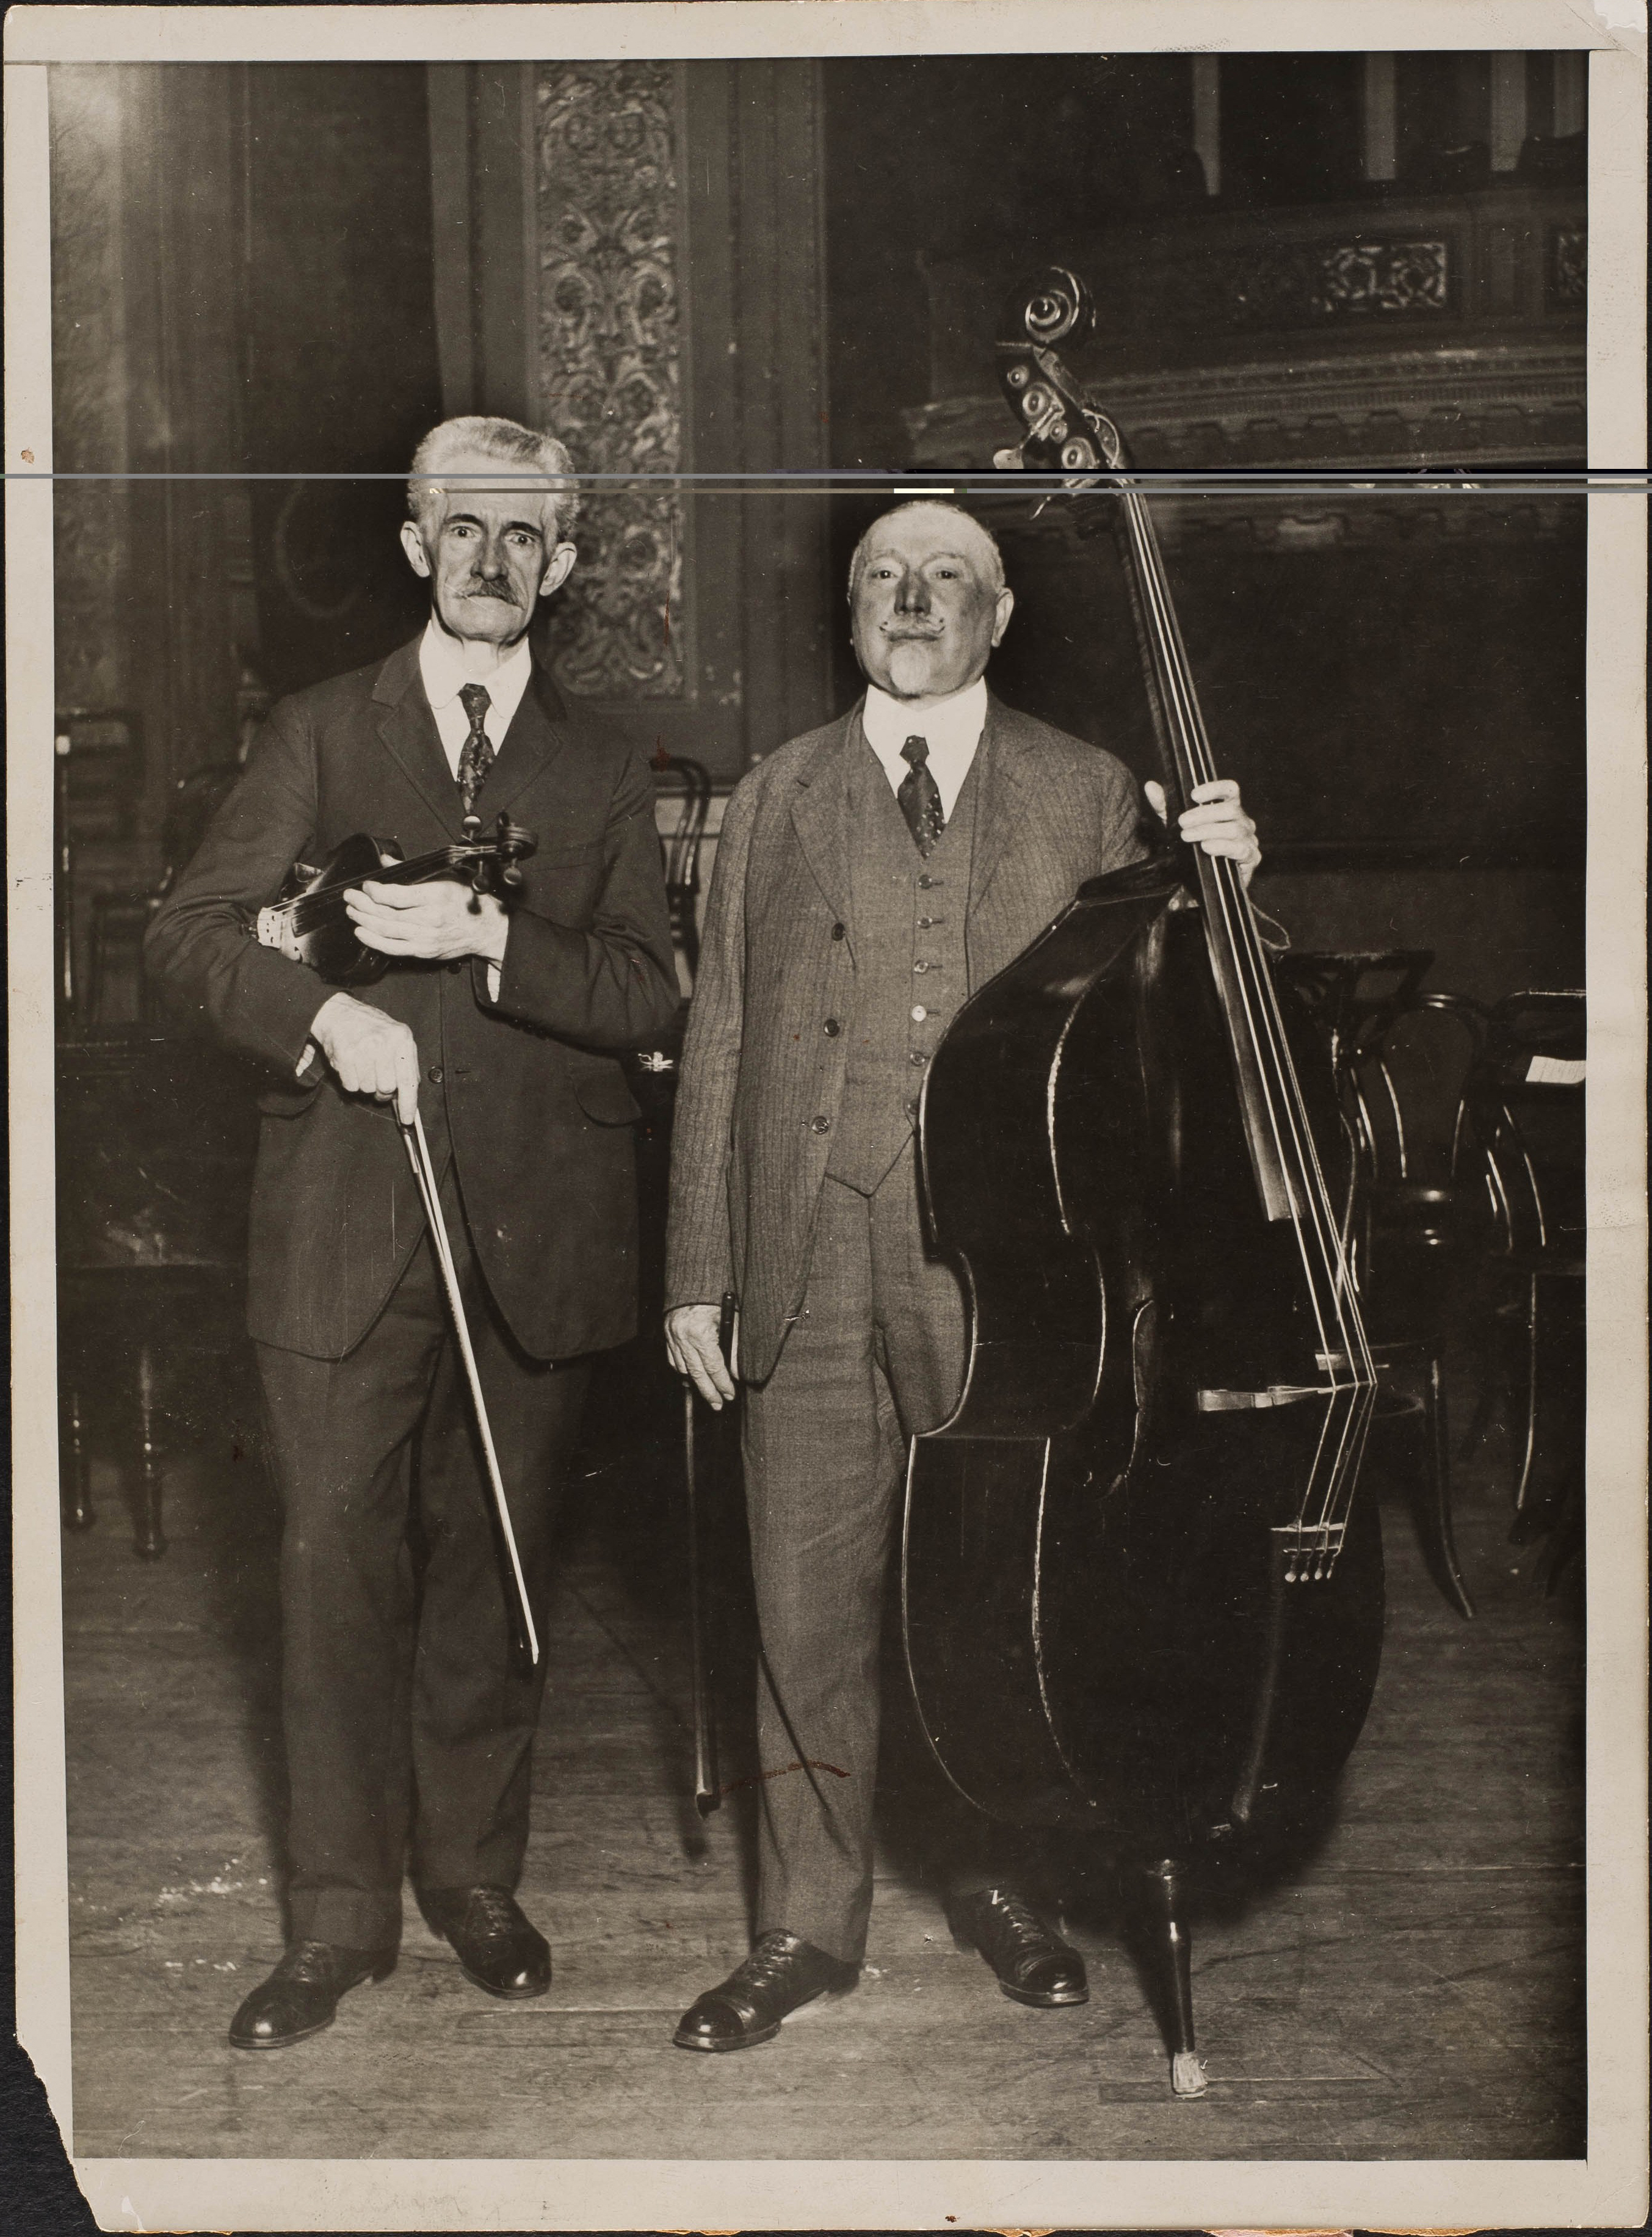 Henry Boewig, Philharmonic Librarian and violinist (1888-1918) with Ludwig Manoly, a member of the Philharmonic bass section (1879-1927)